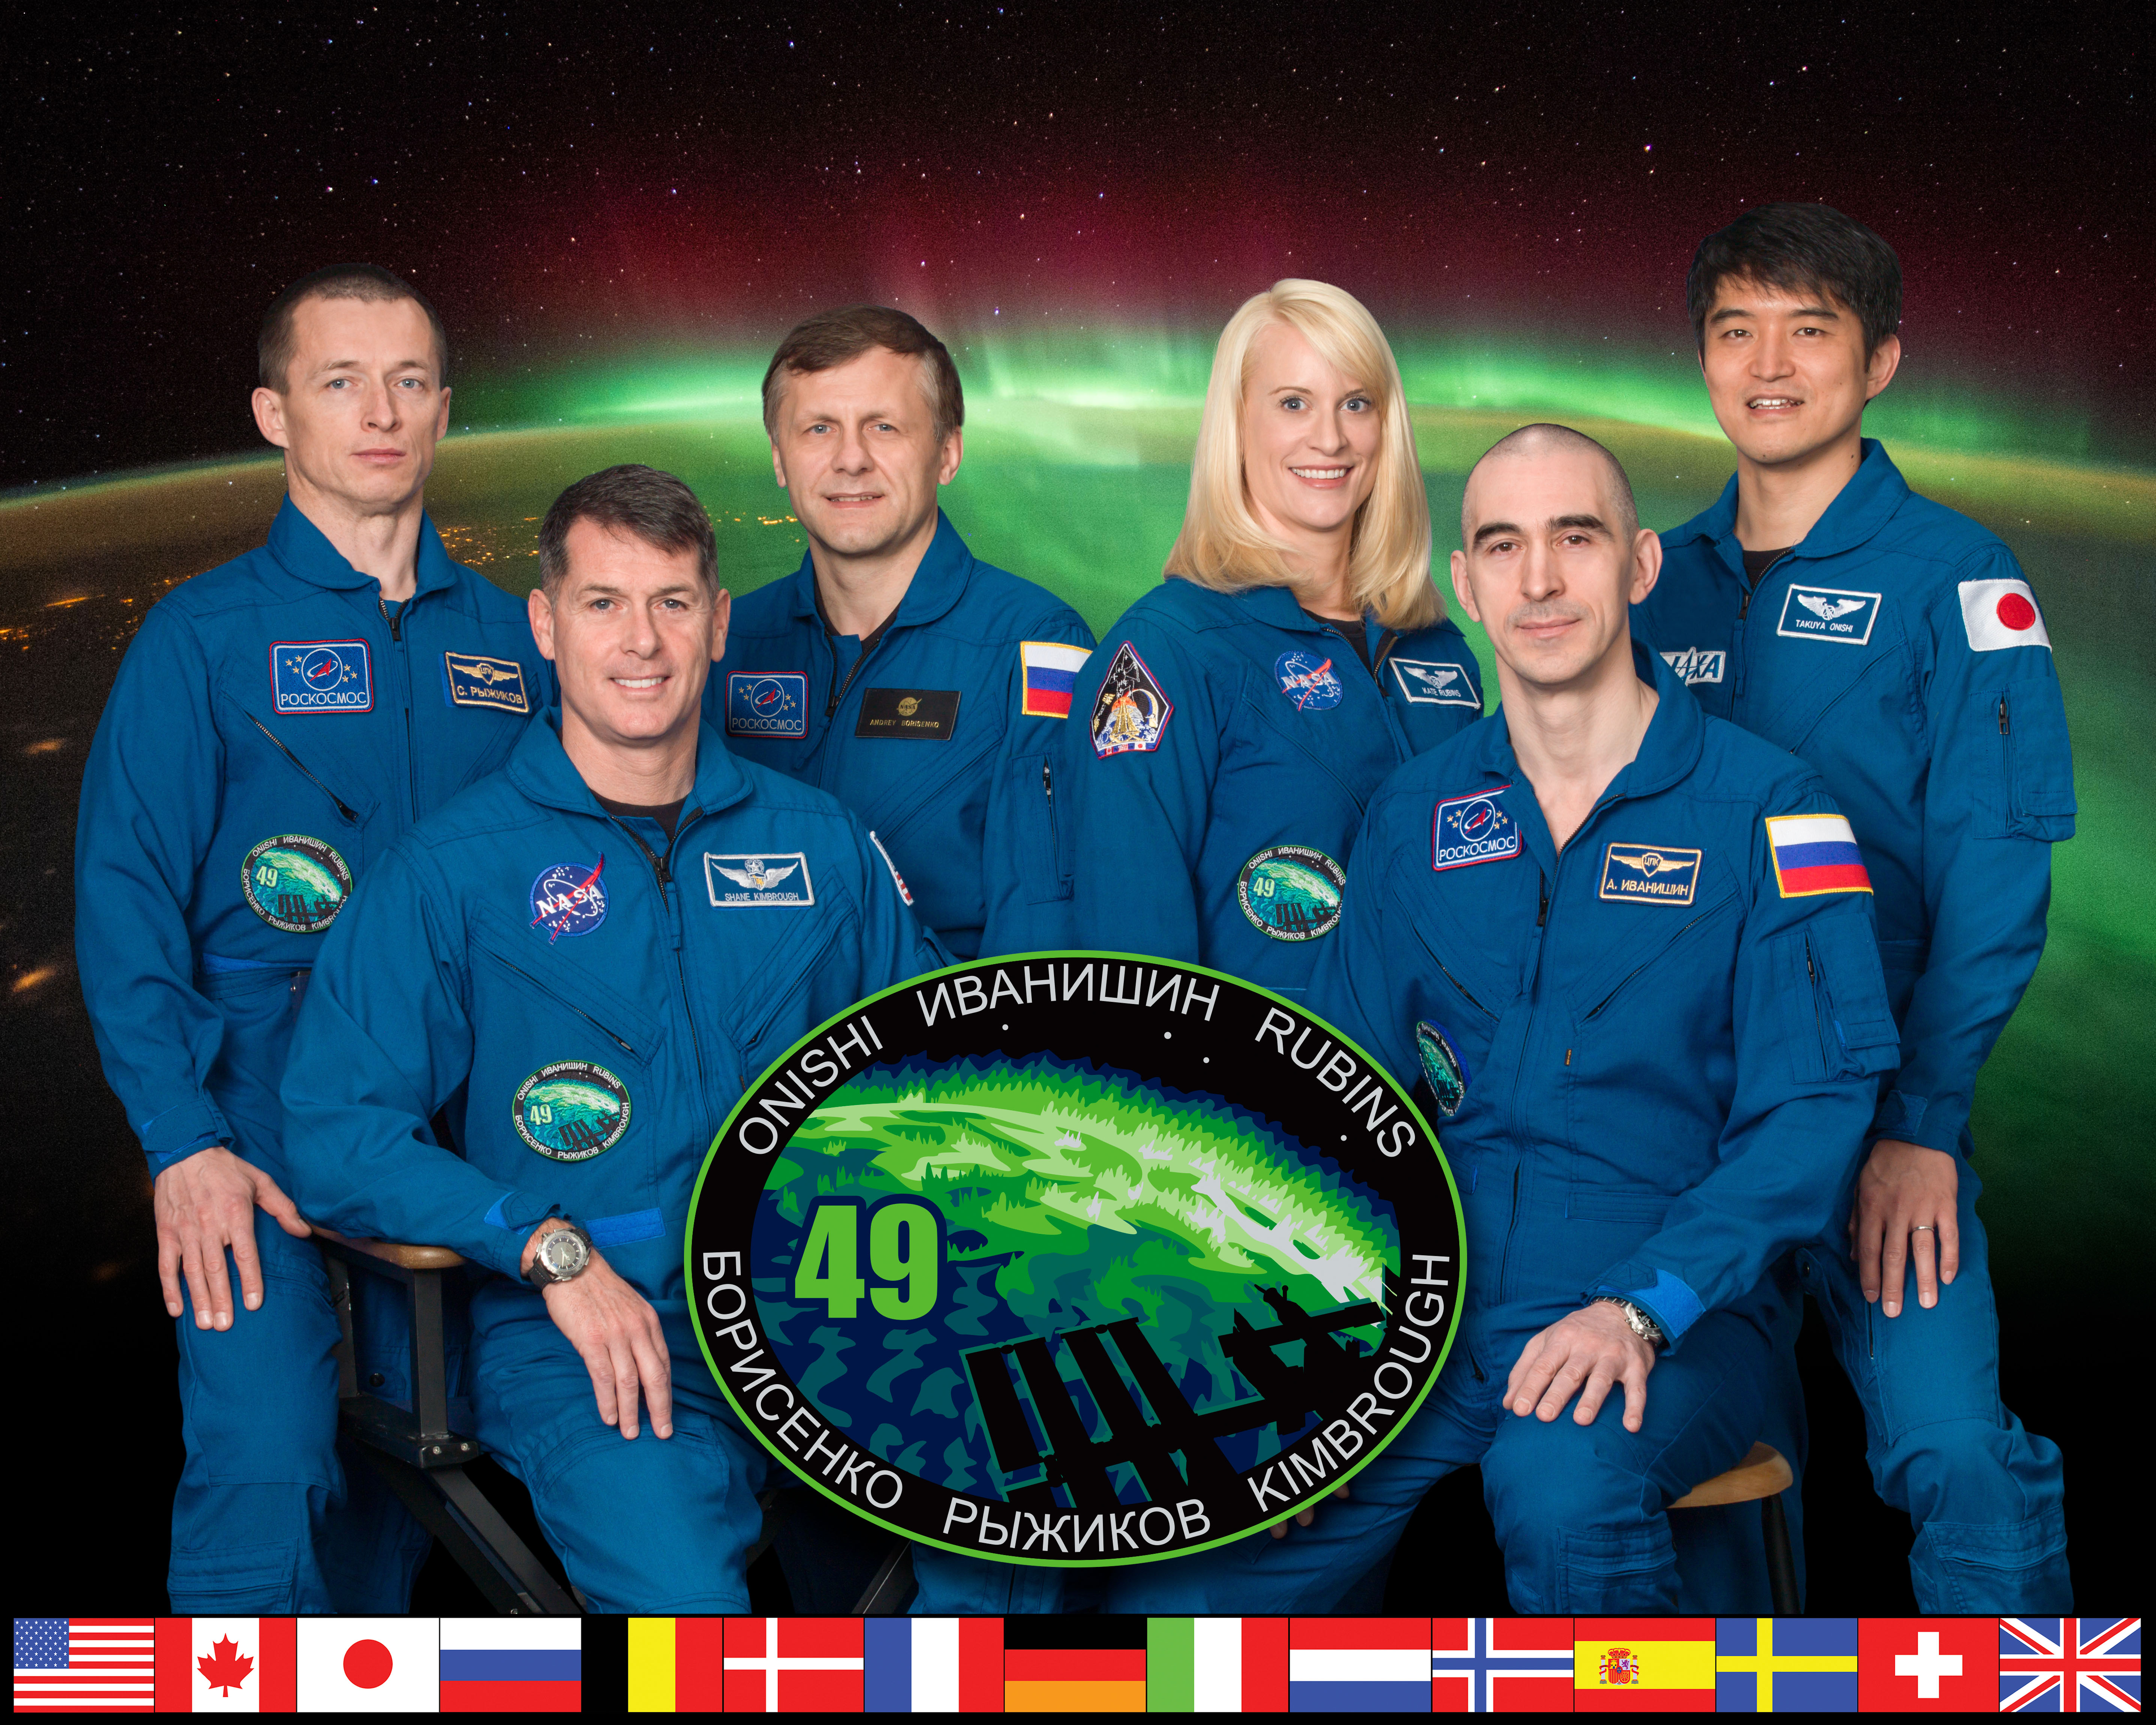 Expedition 49 Official Crew Portrait